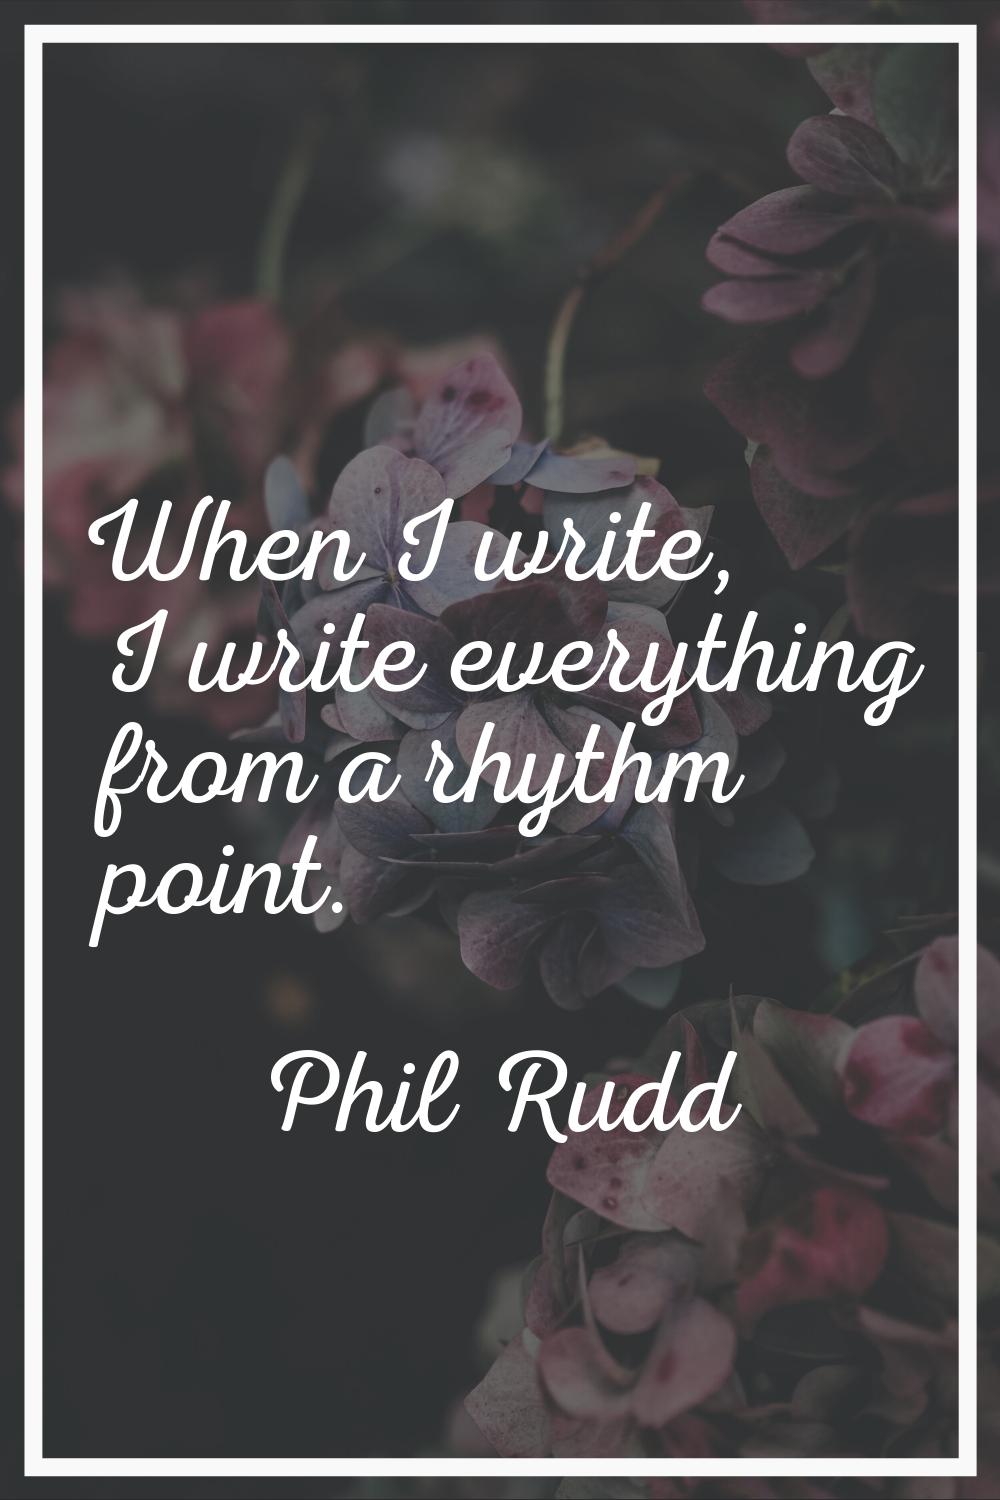 When I write, I write everything from a rhythm point.